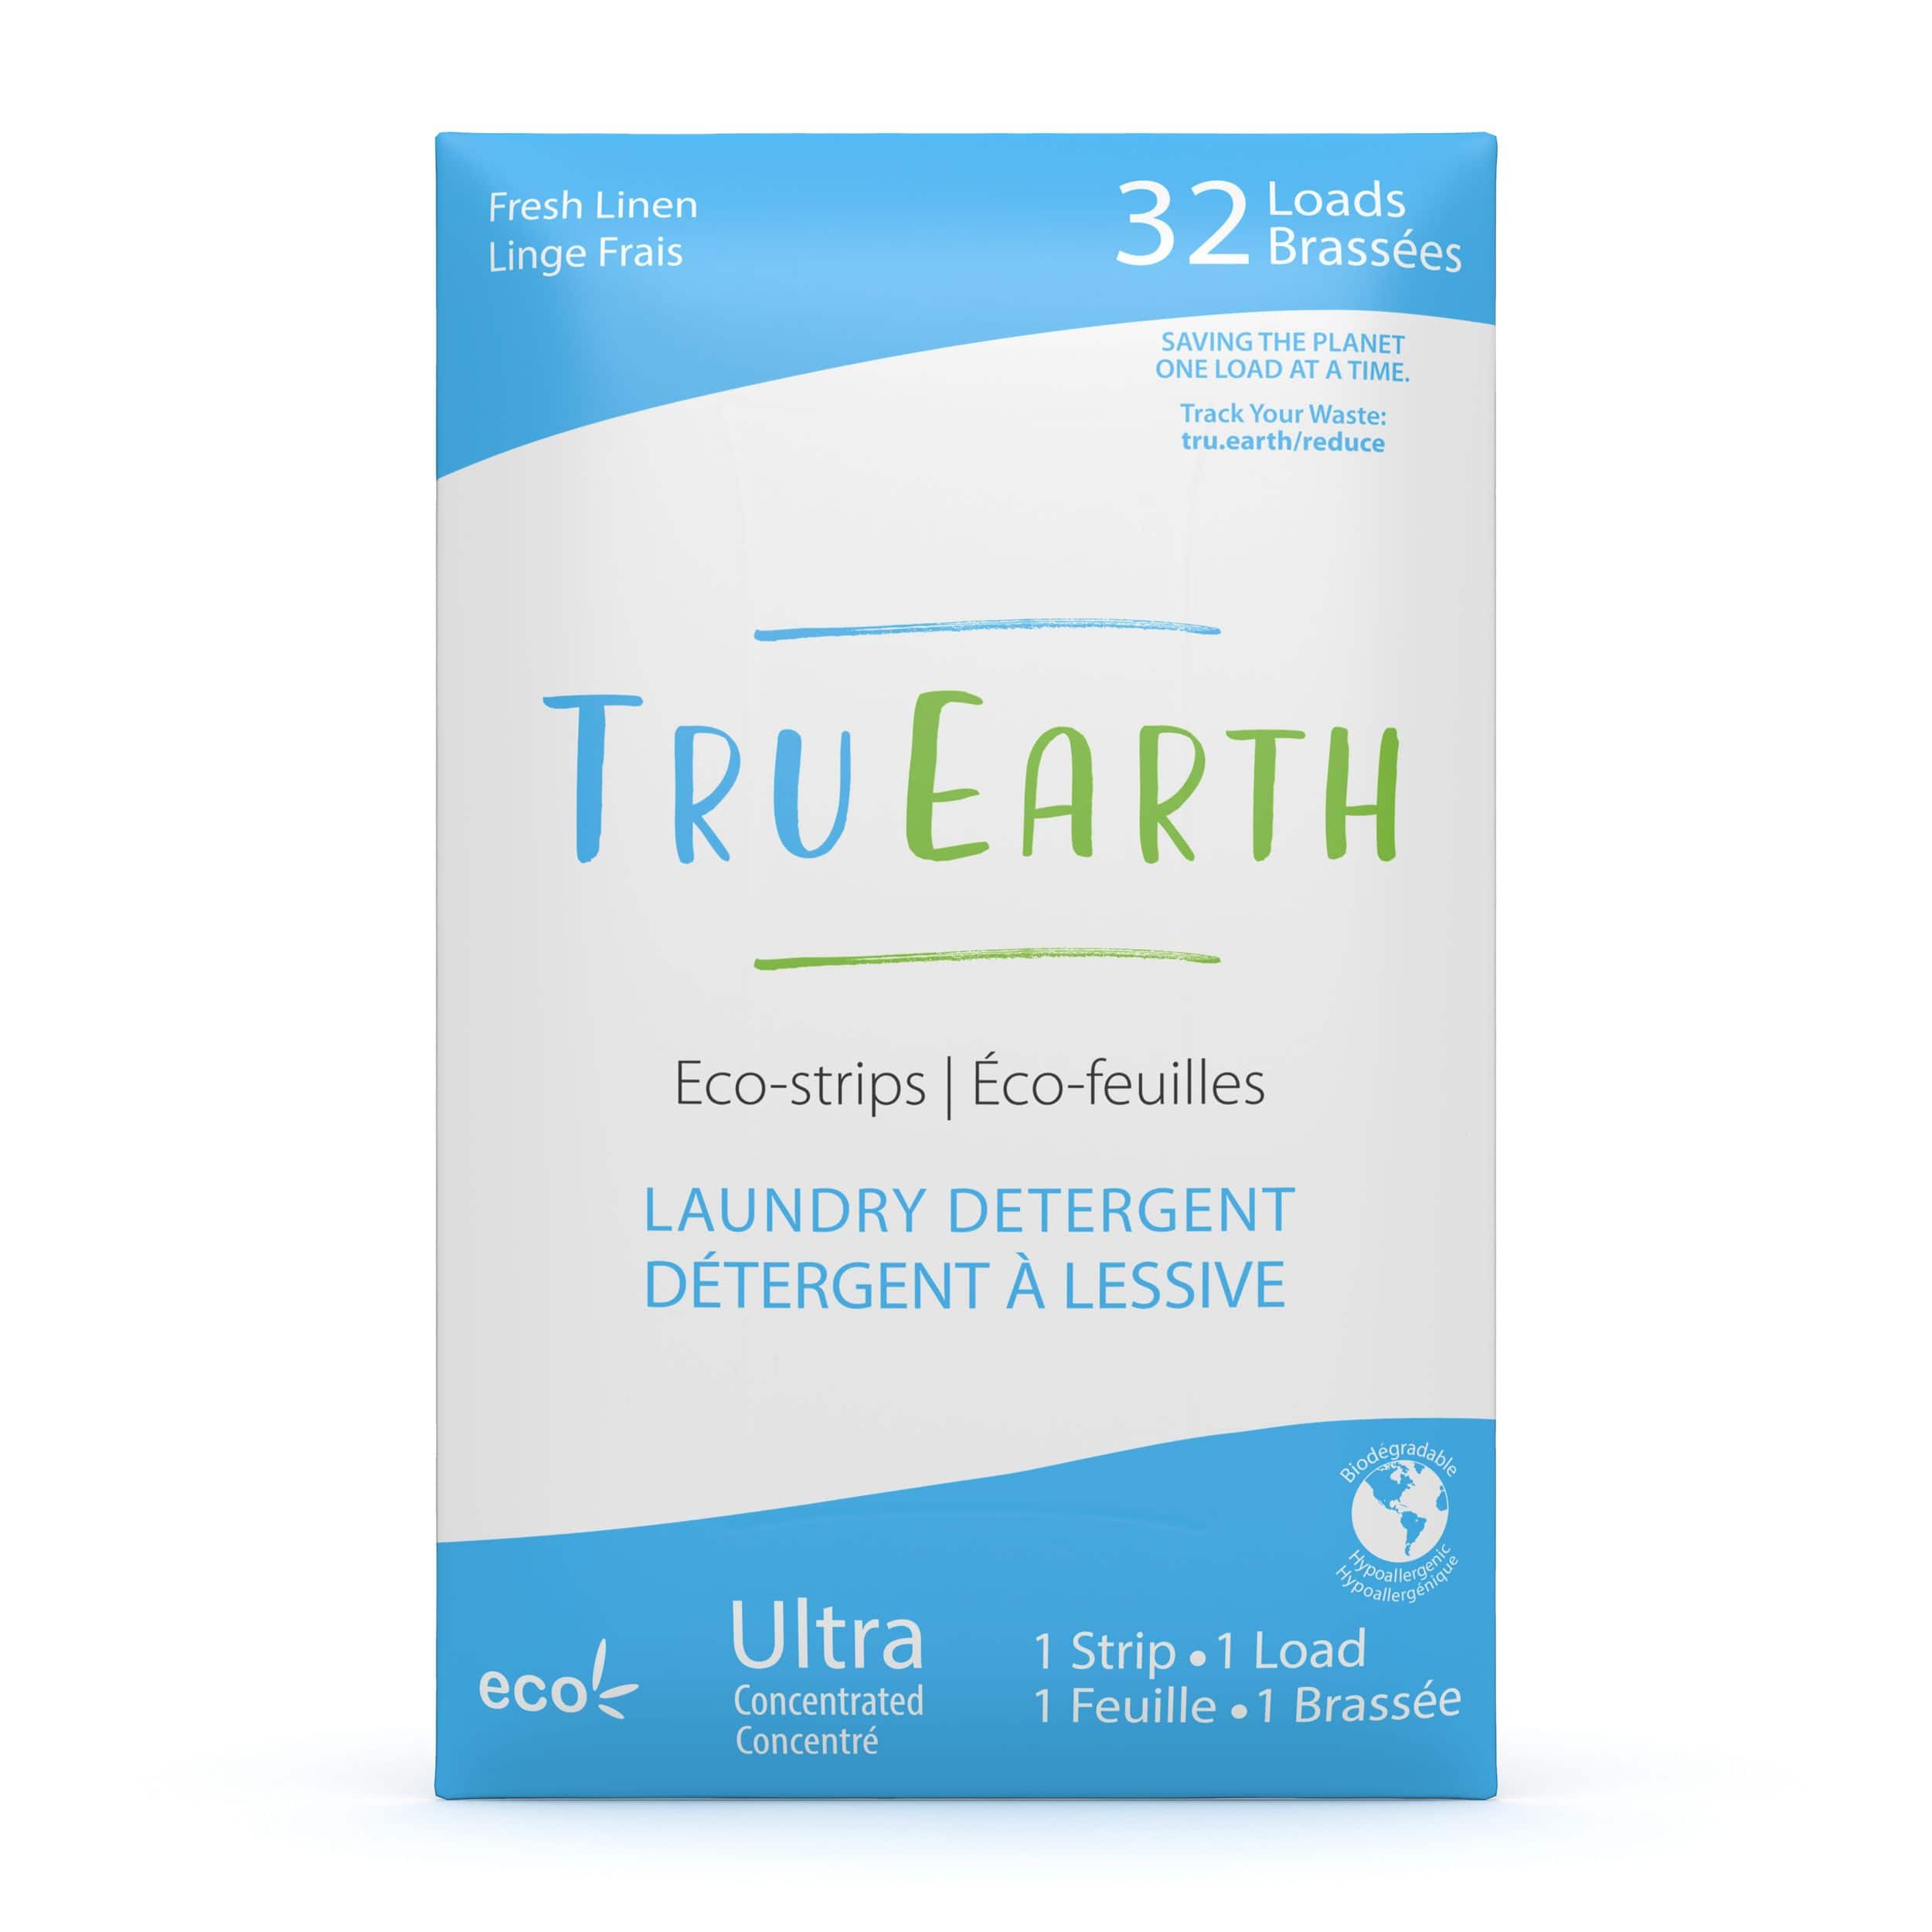 Tru Earth Compact Dry Laundry Detergent Sheets, Unscented - Up to 64 Loads  (32 Sheets) - Paraben-Free - Original Eco-Strip Liquidless Laundry